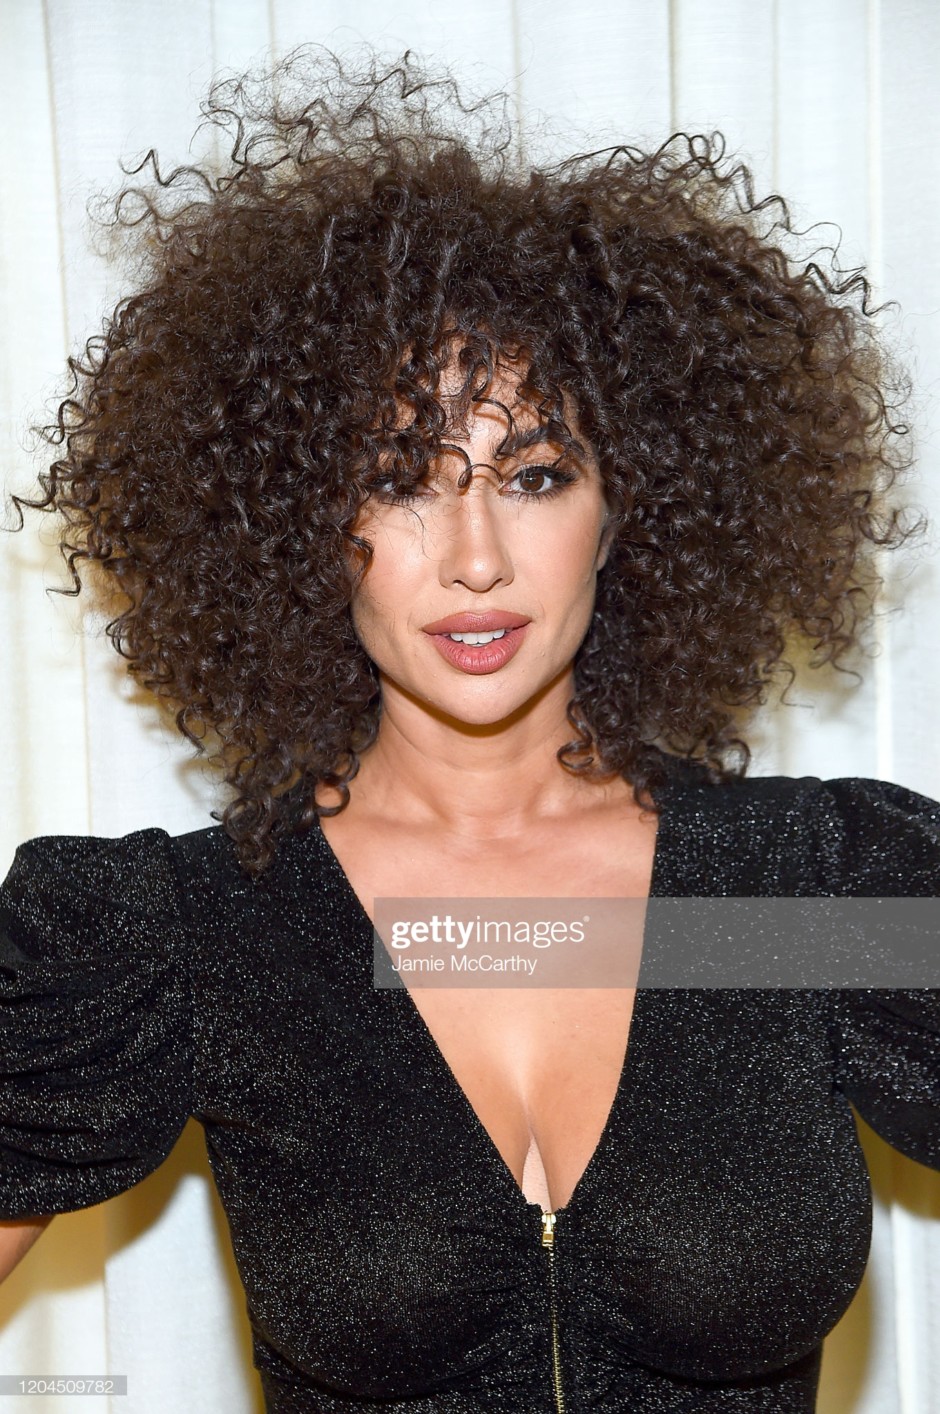 gettyimages-1204509782-2048x2048